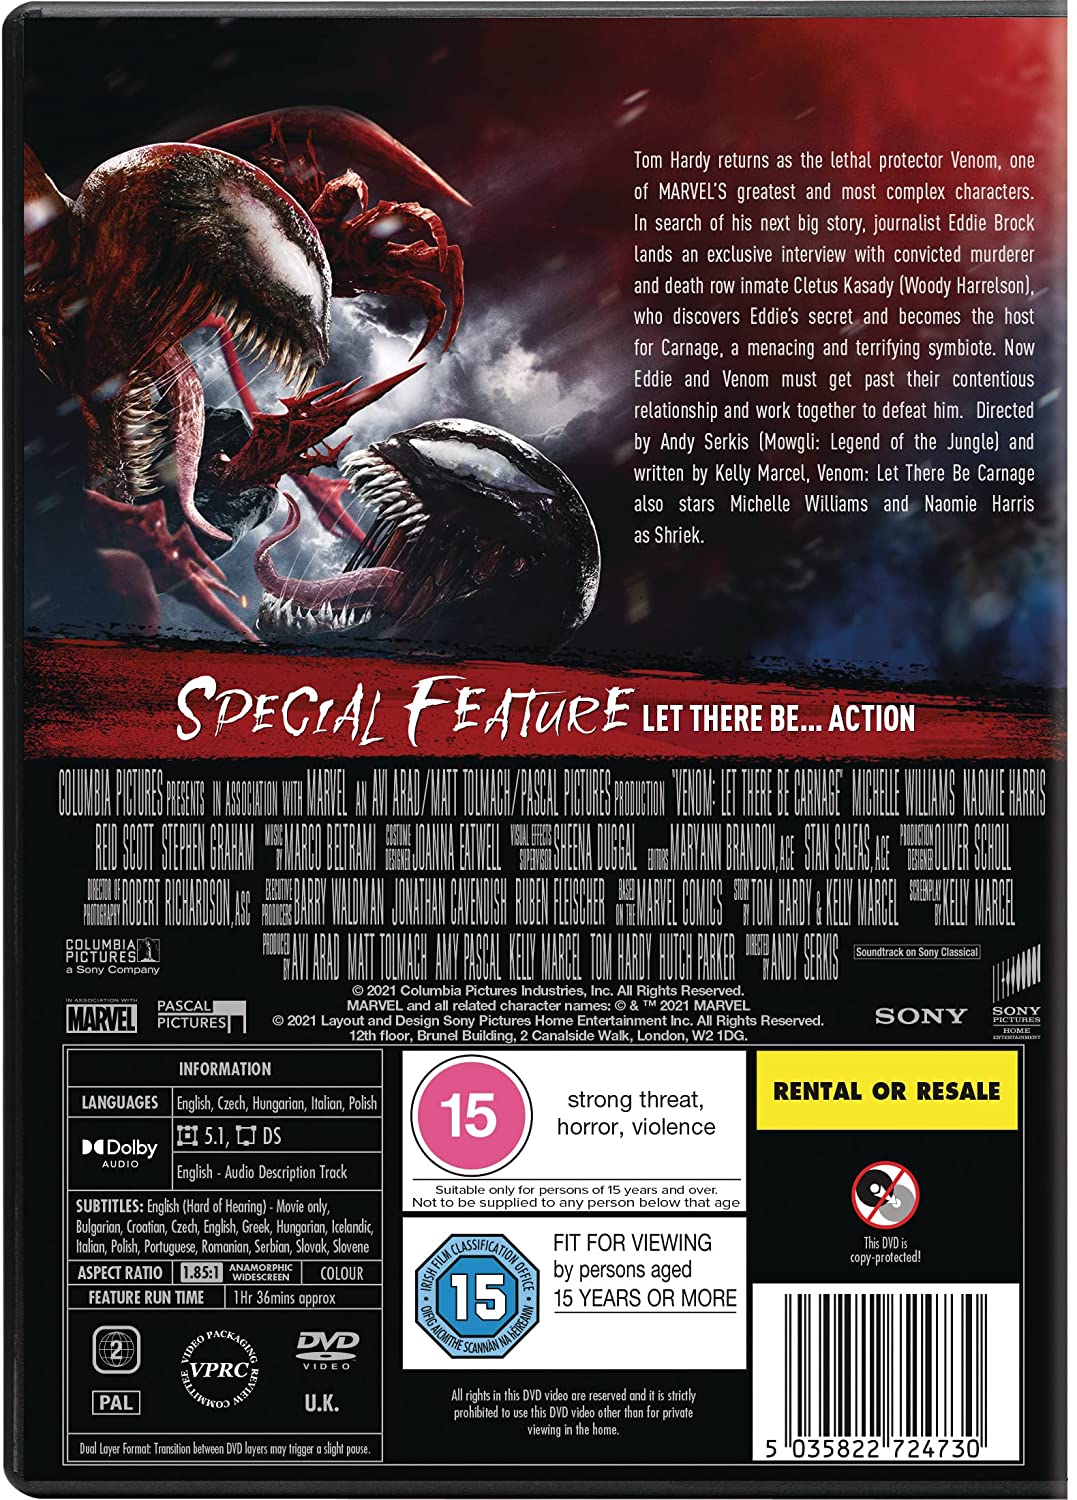 Venom: Let There Be Carnage [DVD] [2021] - Action/Adventure [DVD]